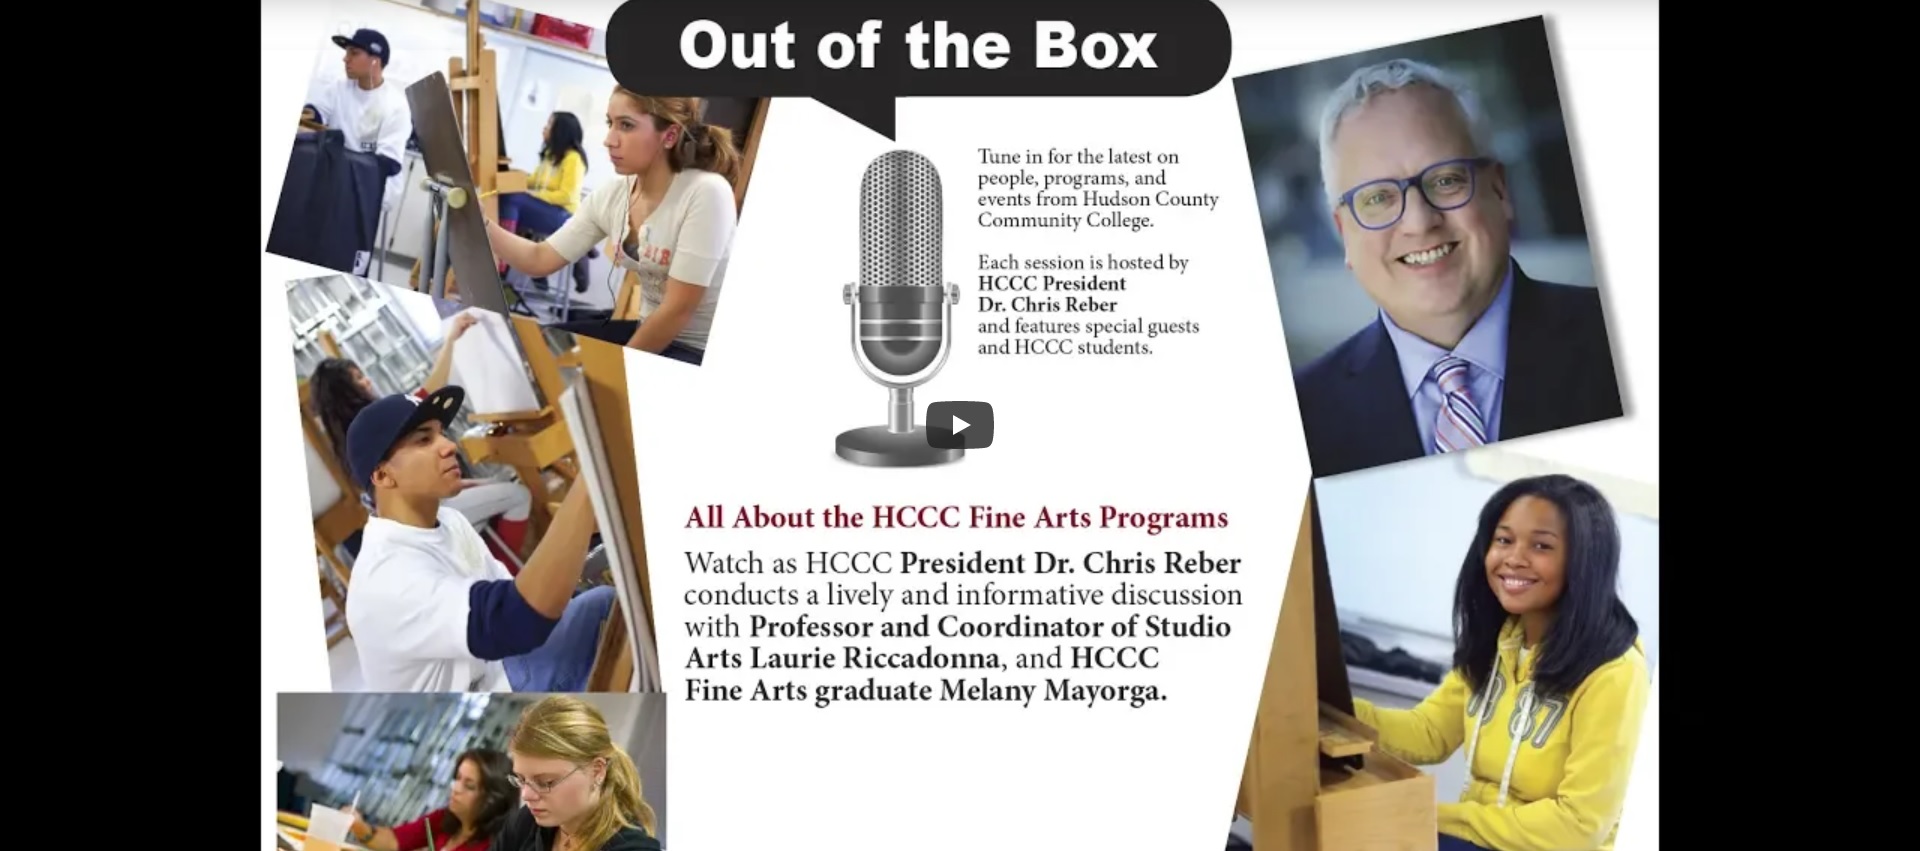 All About the HCCC Fine Arts Programs